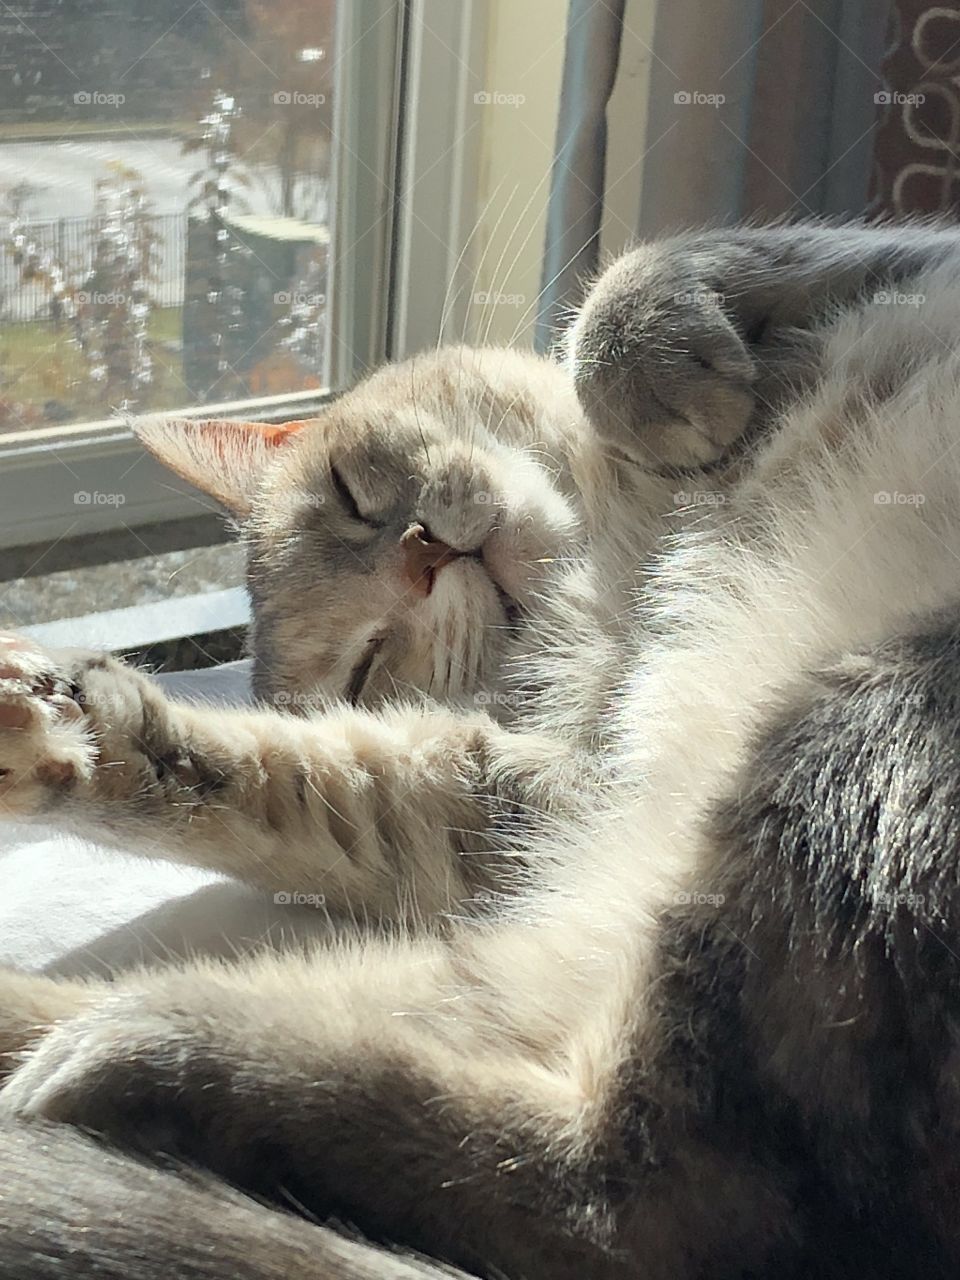 My kitty cat lounging in the sunlight. She is my baby girl and I love her so much! 